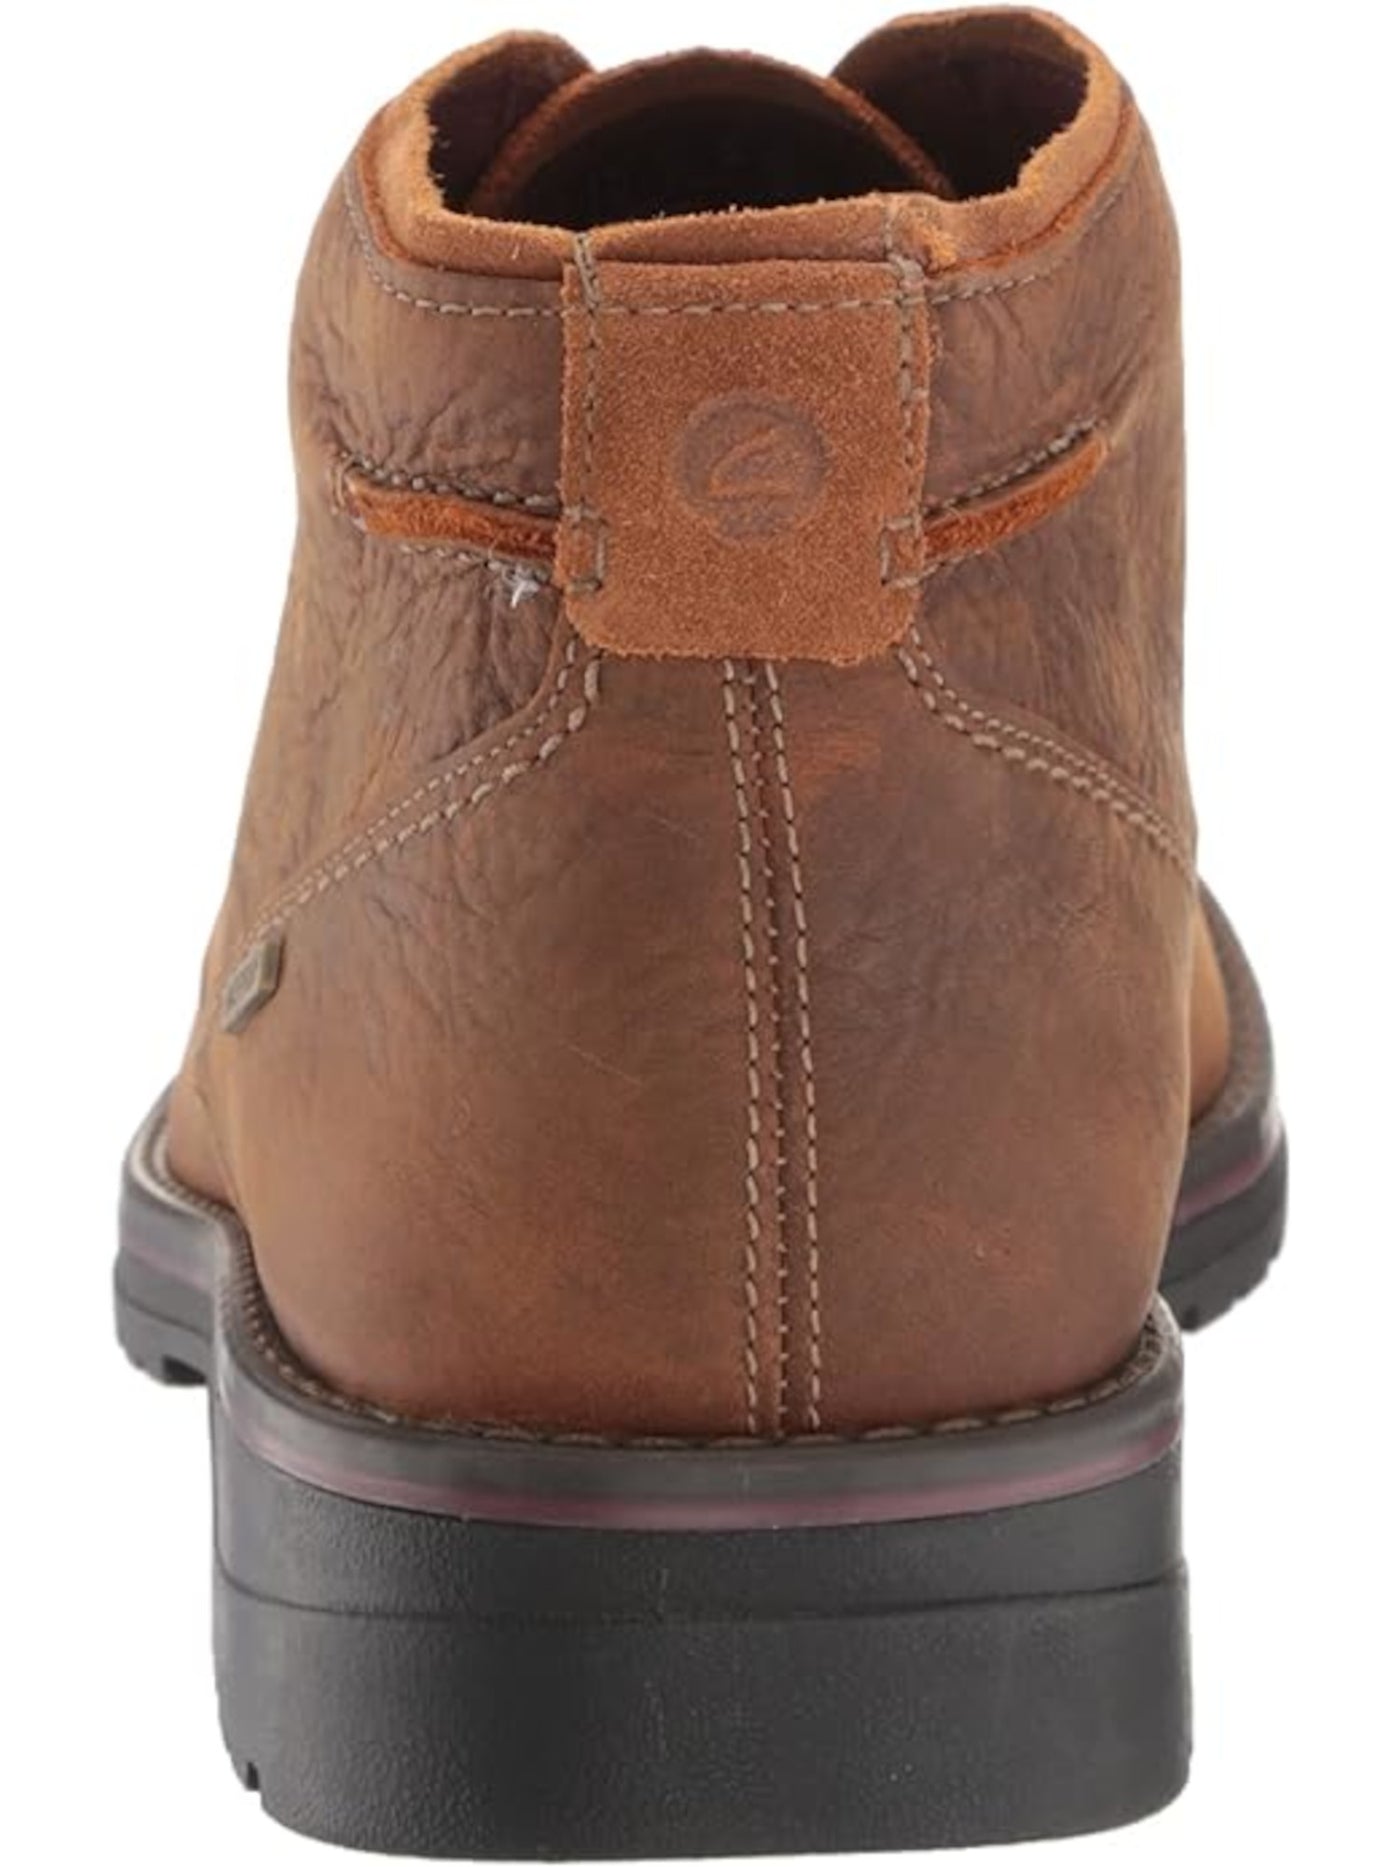 COLLECTION BY CLARKS Mens Brown Water Resistant Cushioned Removable Insole Morris Peak Round Toe Lace-Up Chukka Boots 8 W